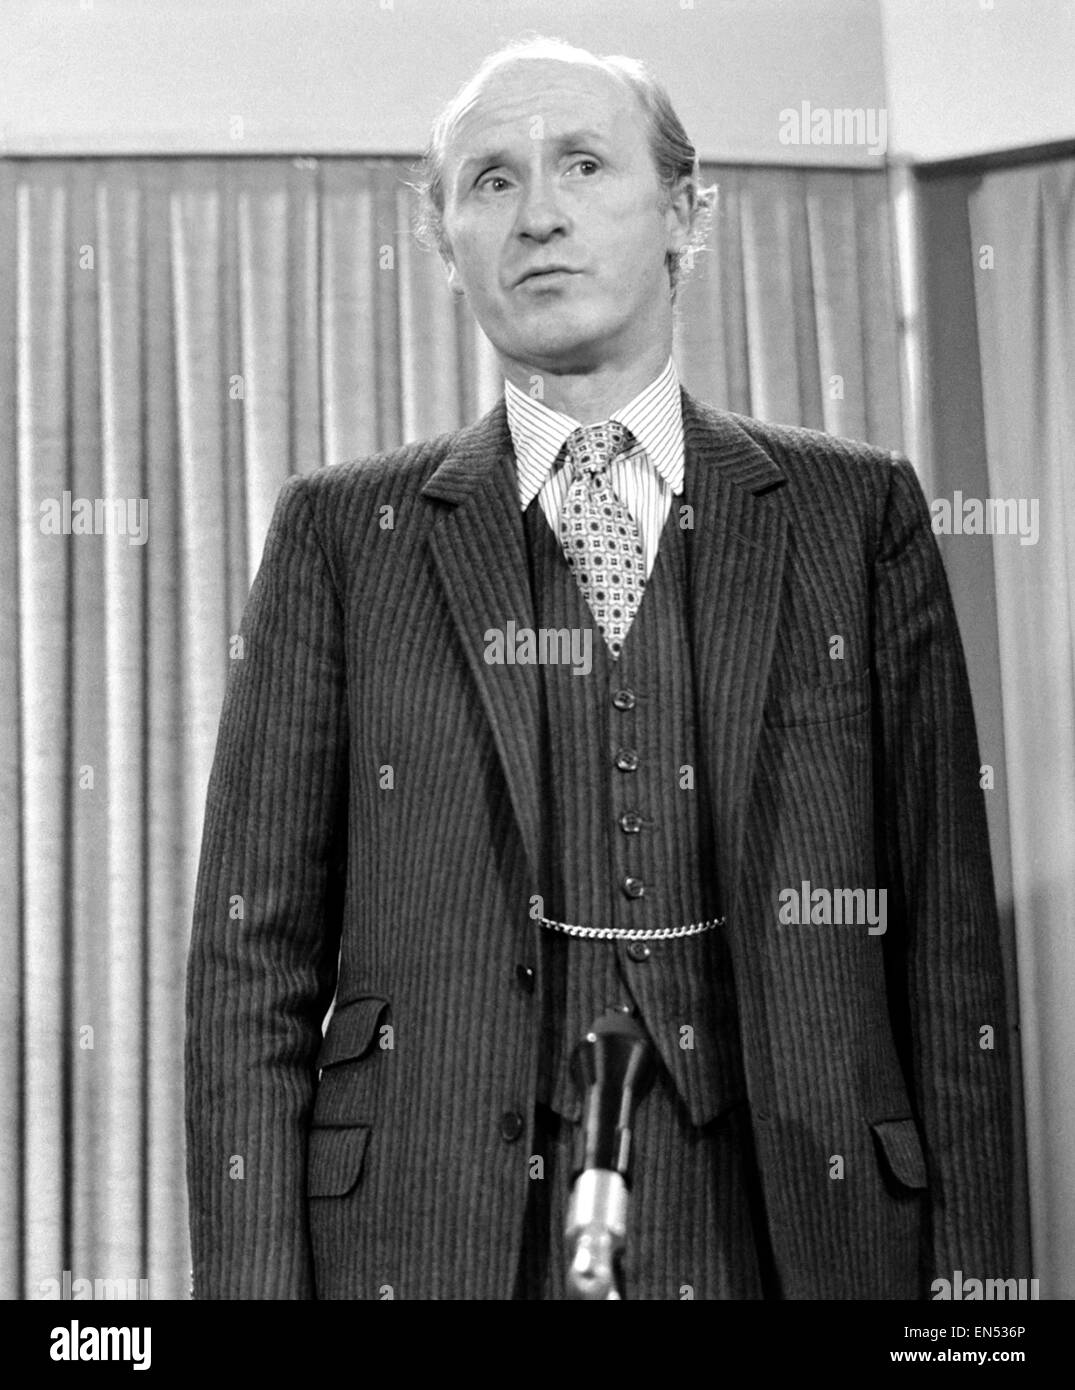 Chancellor of the Exchequer Anthony Barber speaks at a Conservative Party Press Conference during the 1974 general election campaign. 18th February 1974. Stock Photo